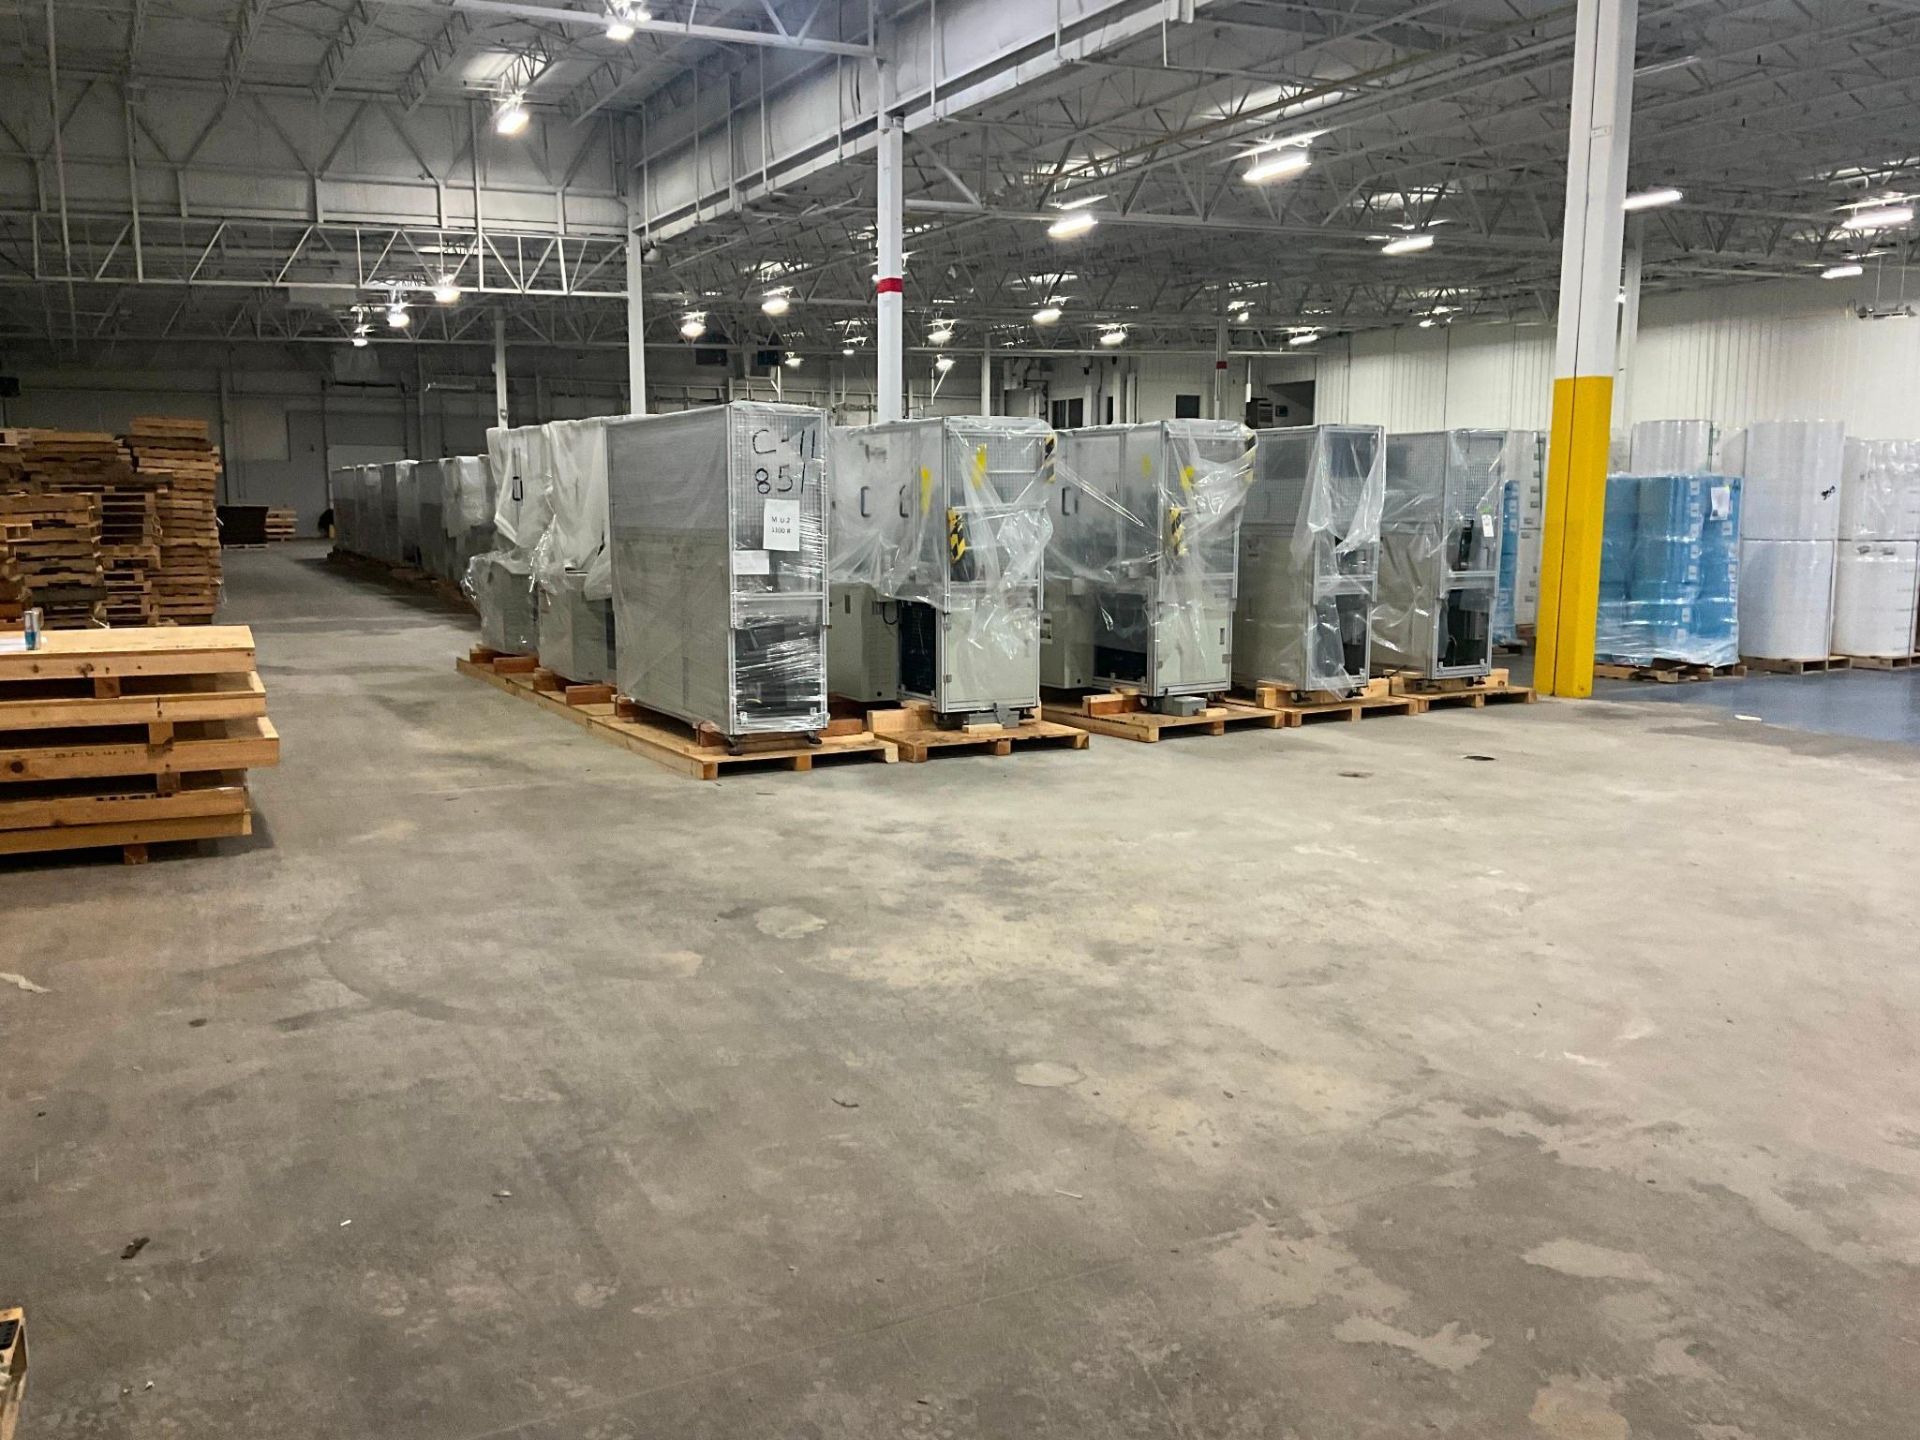 (38) 2020 KYD AUTOMATIC MASK MACHINE WITH ROLL BACK,CUTTER,EARLOOP WELDER, & CONVEYOR - CRATED